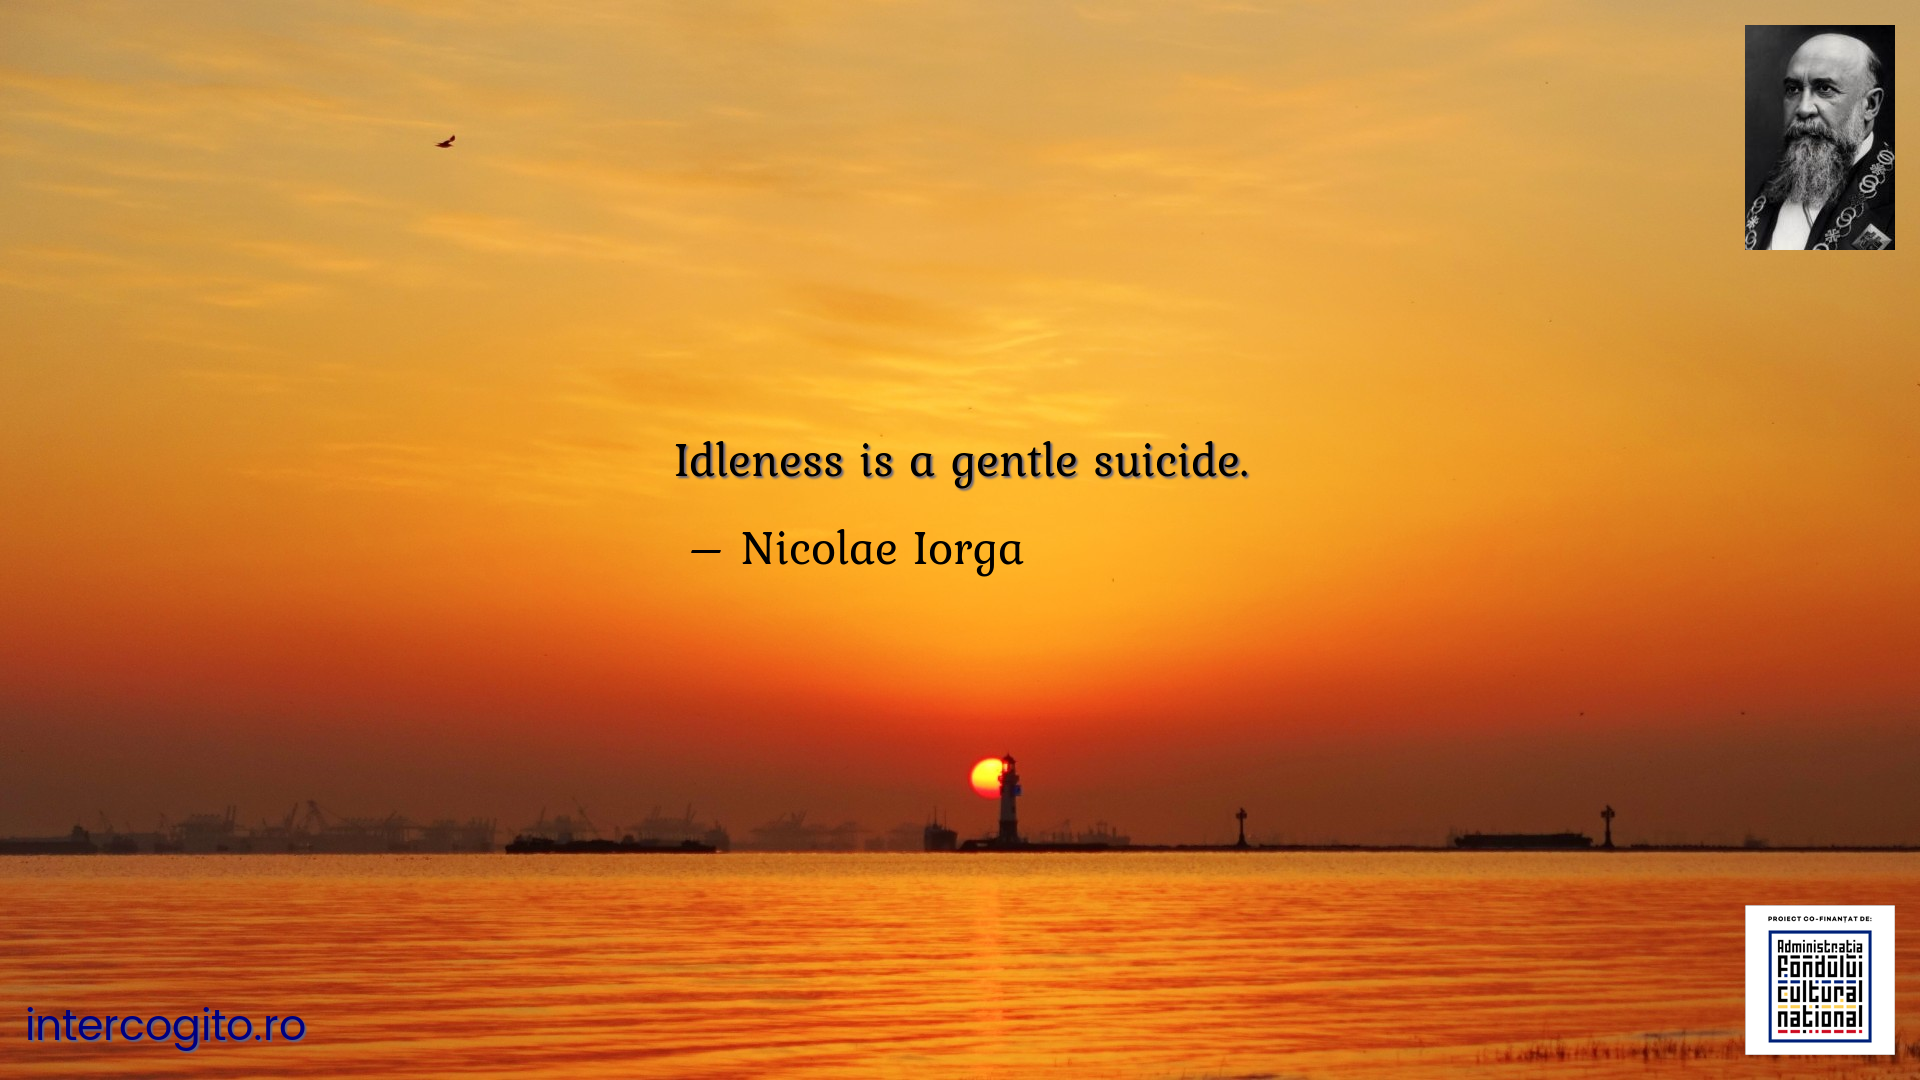 Idleness is a gentle suicide.